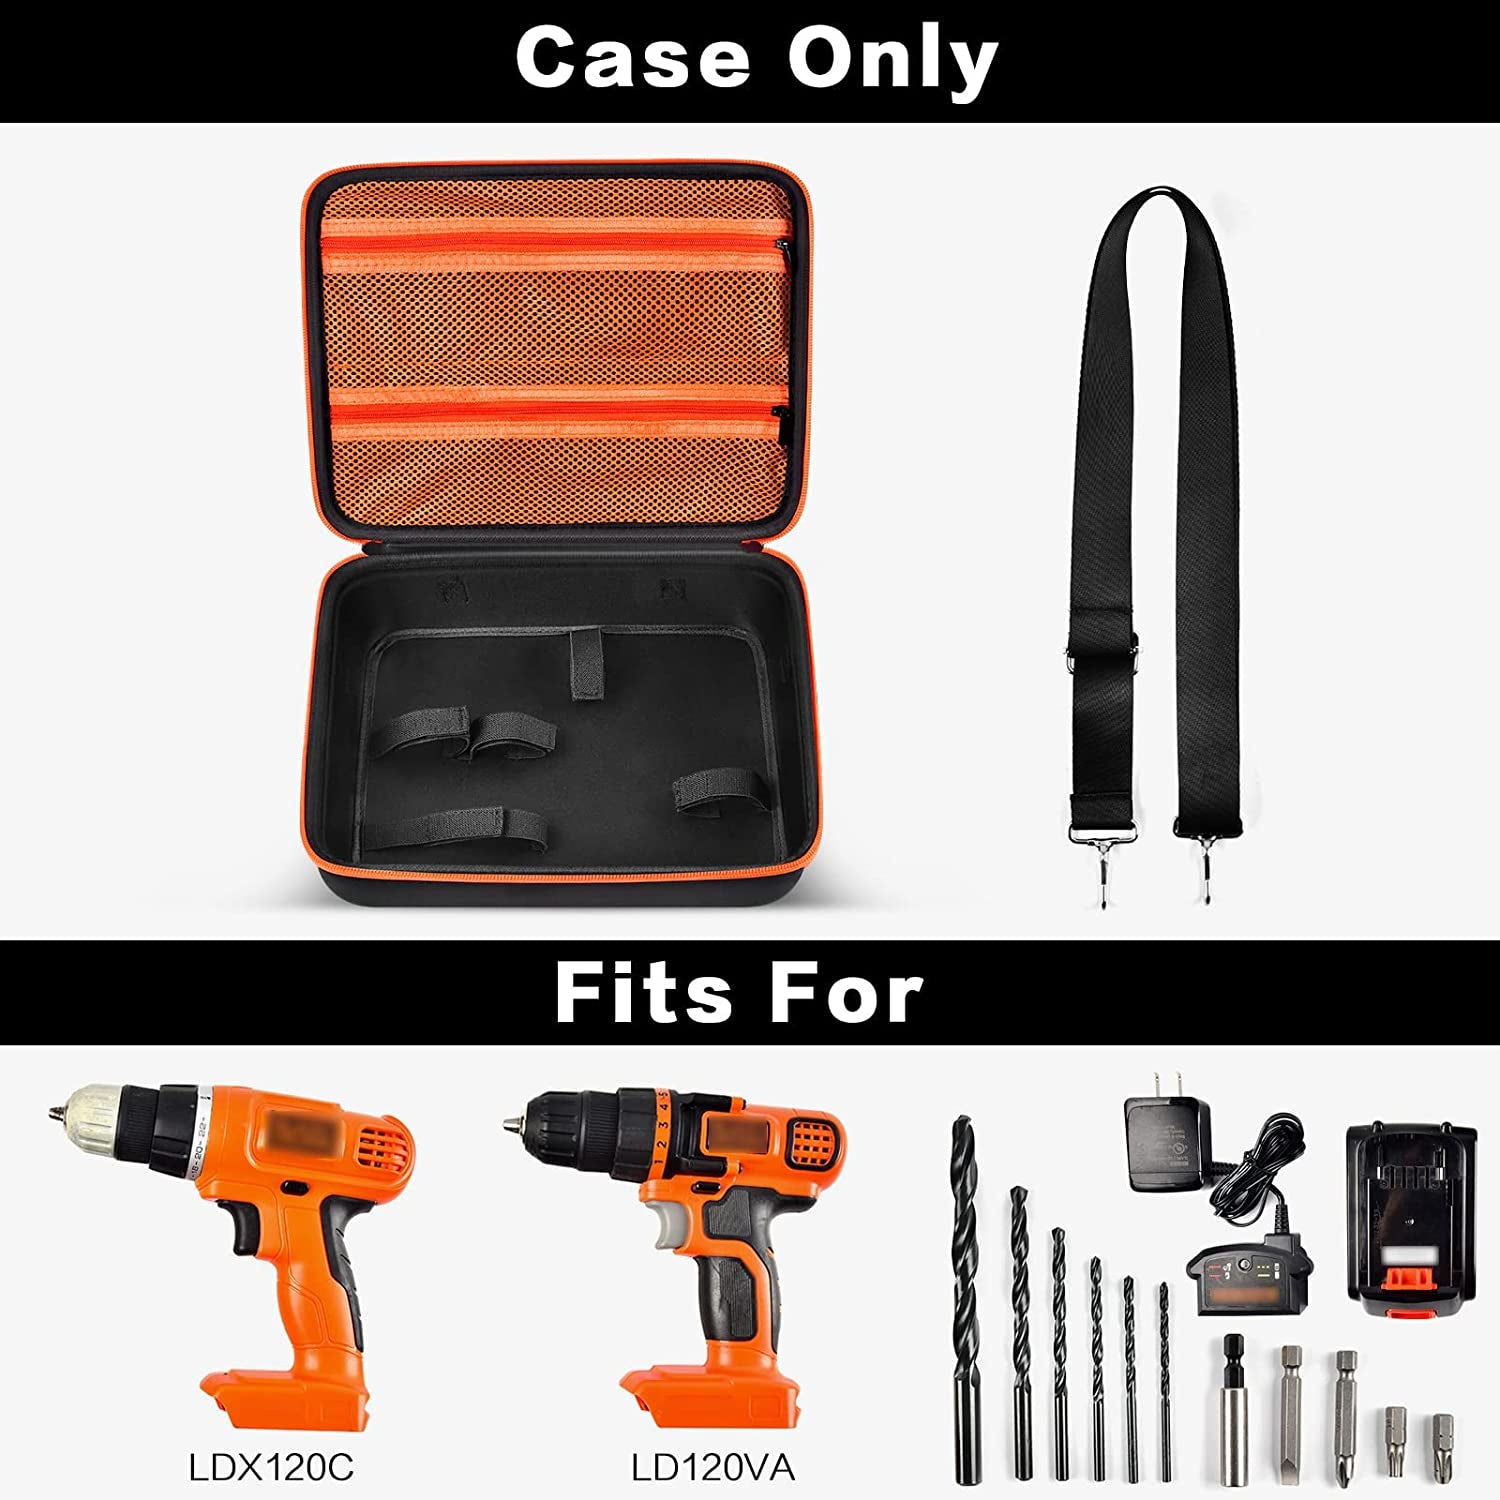 Case Compatible with BLACK+DECKER 20V MAX Cordless Drill/Driver(Ld120Va/ LDX120C), Interchangeable Battery and Charger Storage Organizer Holder, Mesh Pocket for Drill Bits Accessories - Bag Only